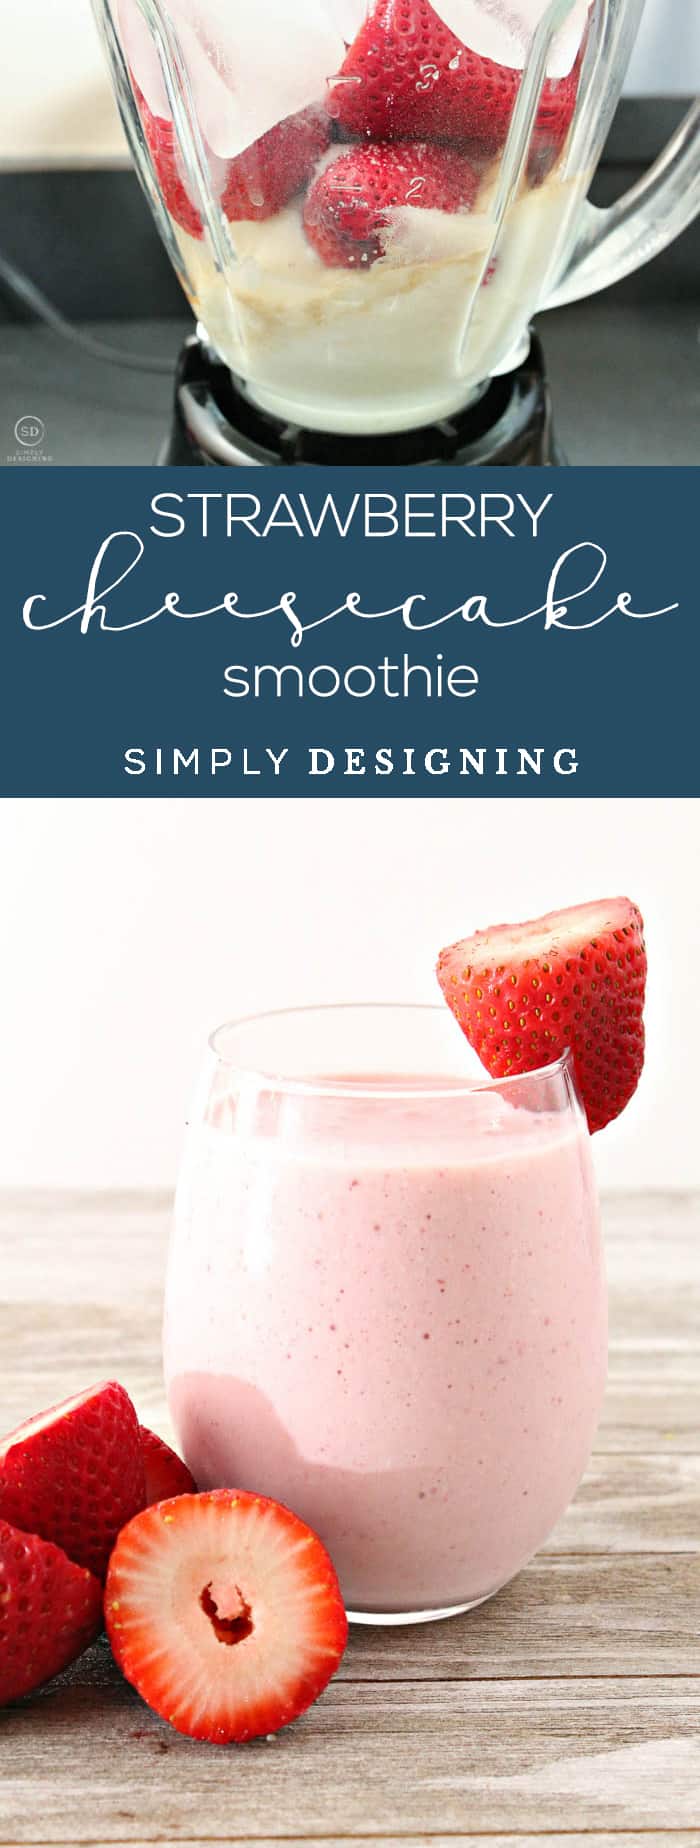 Strawberry Cheesecake Smoothie - this smoothie recipe is simple rich and delicious